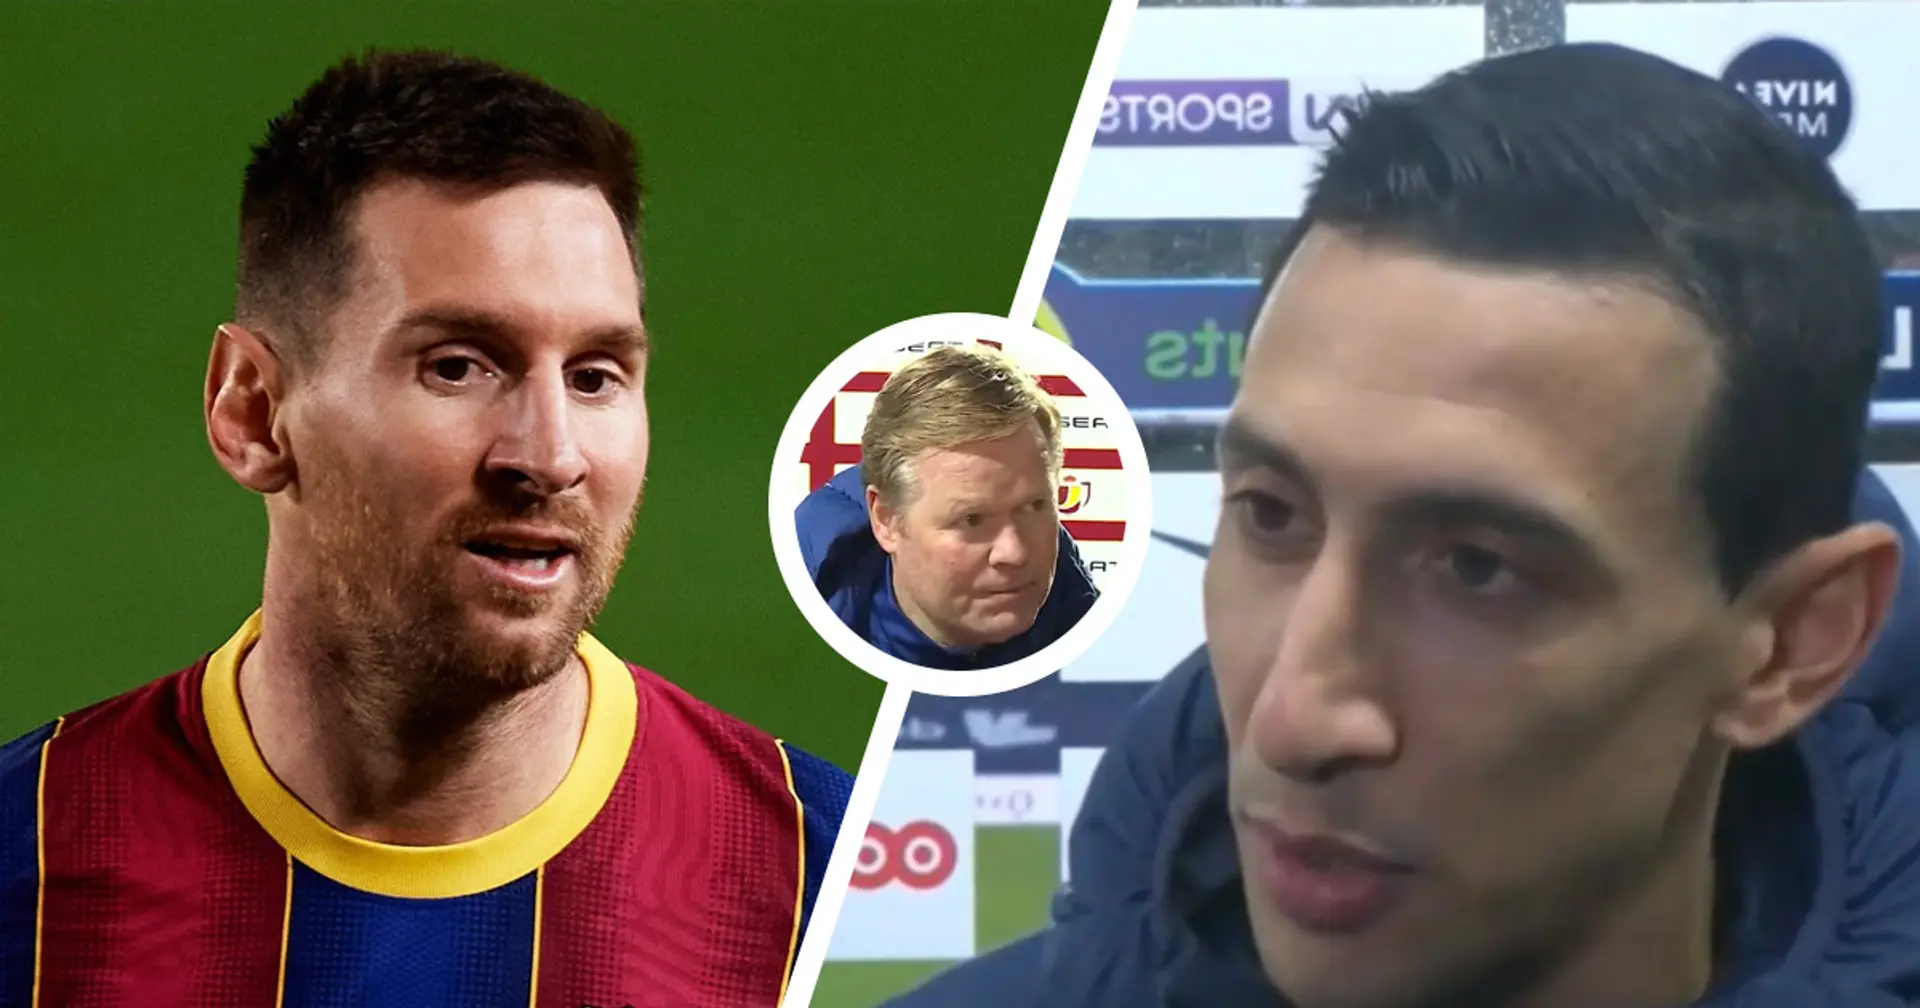 'They talk about Leo too much': Koeman hits back at PSG for 'lack of respect' towards Barca as Di Maria says there's 'big chance' of Messi joining Parisians